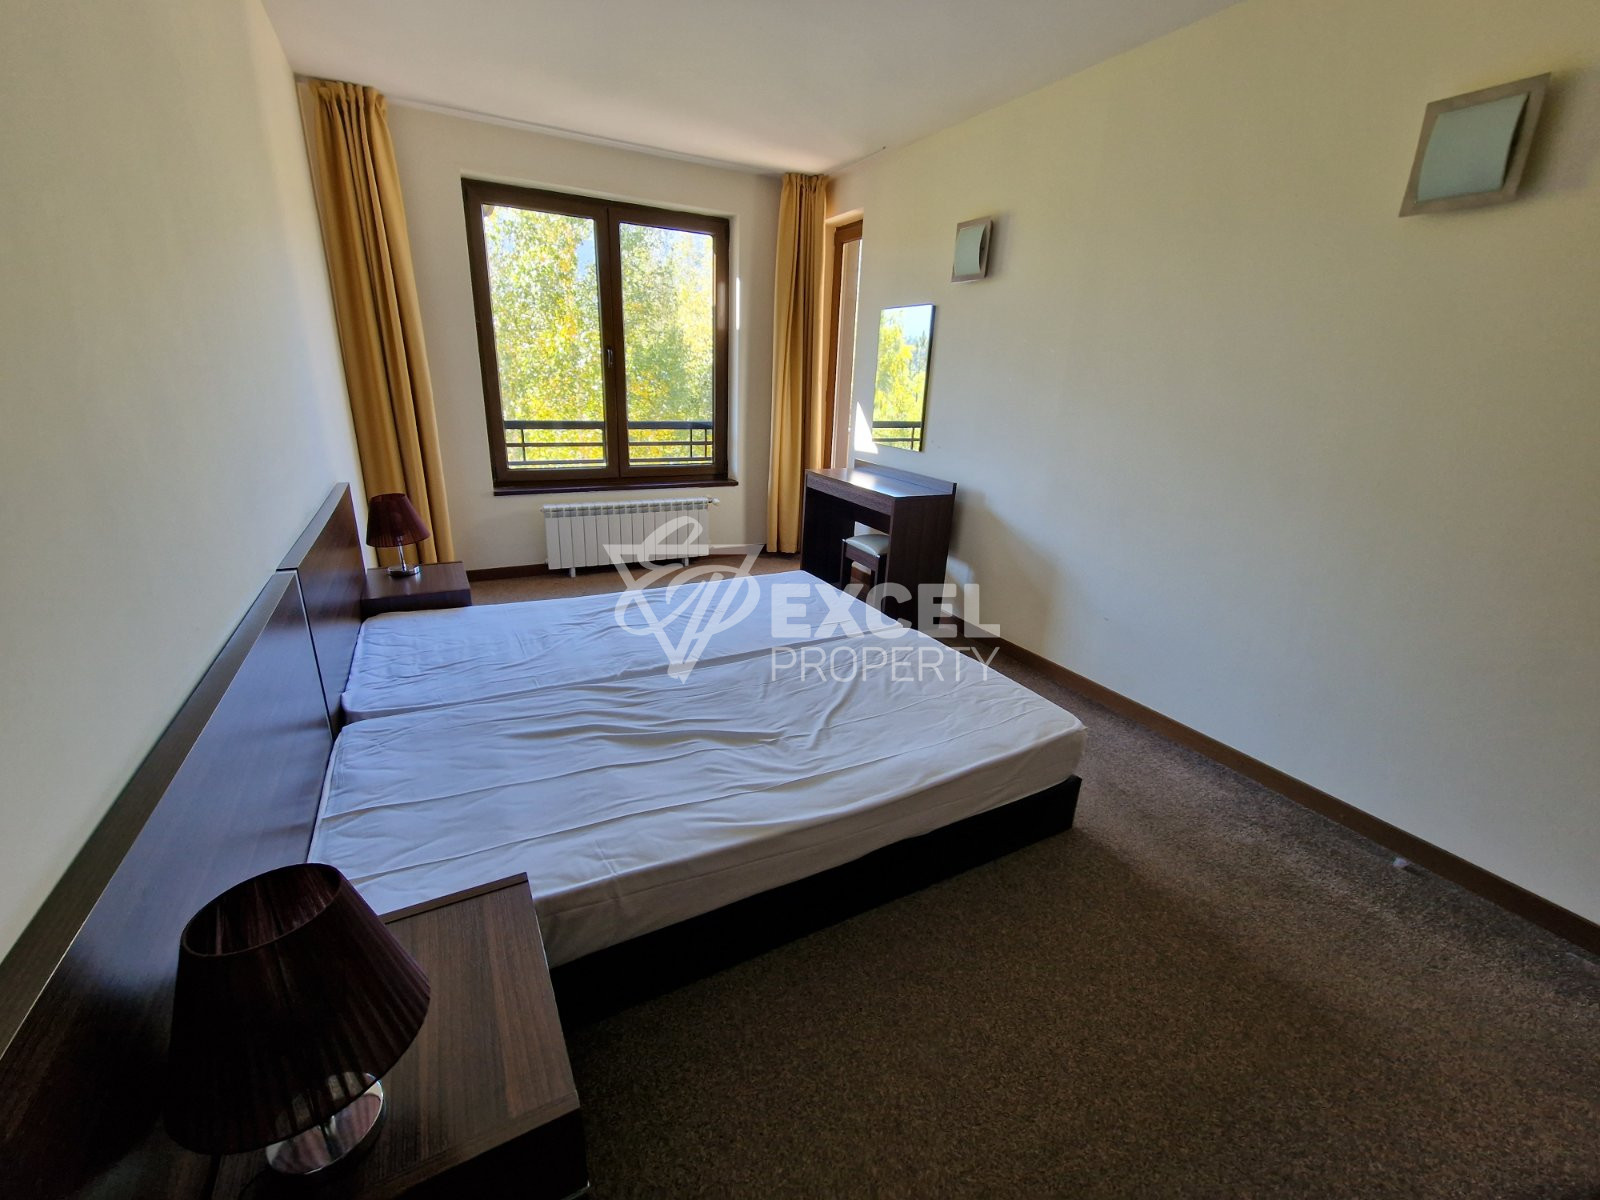 Unique two-bedroom apartment with a stunning view of Pirin in a 4-star complex